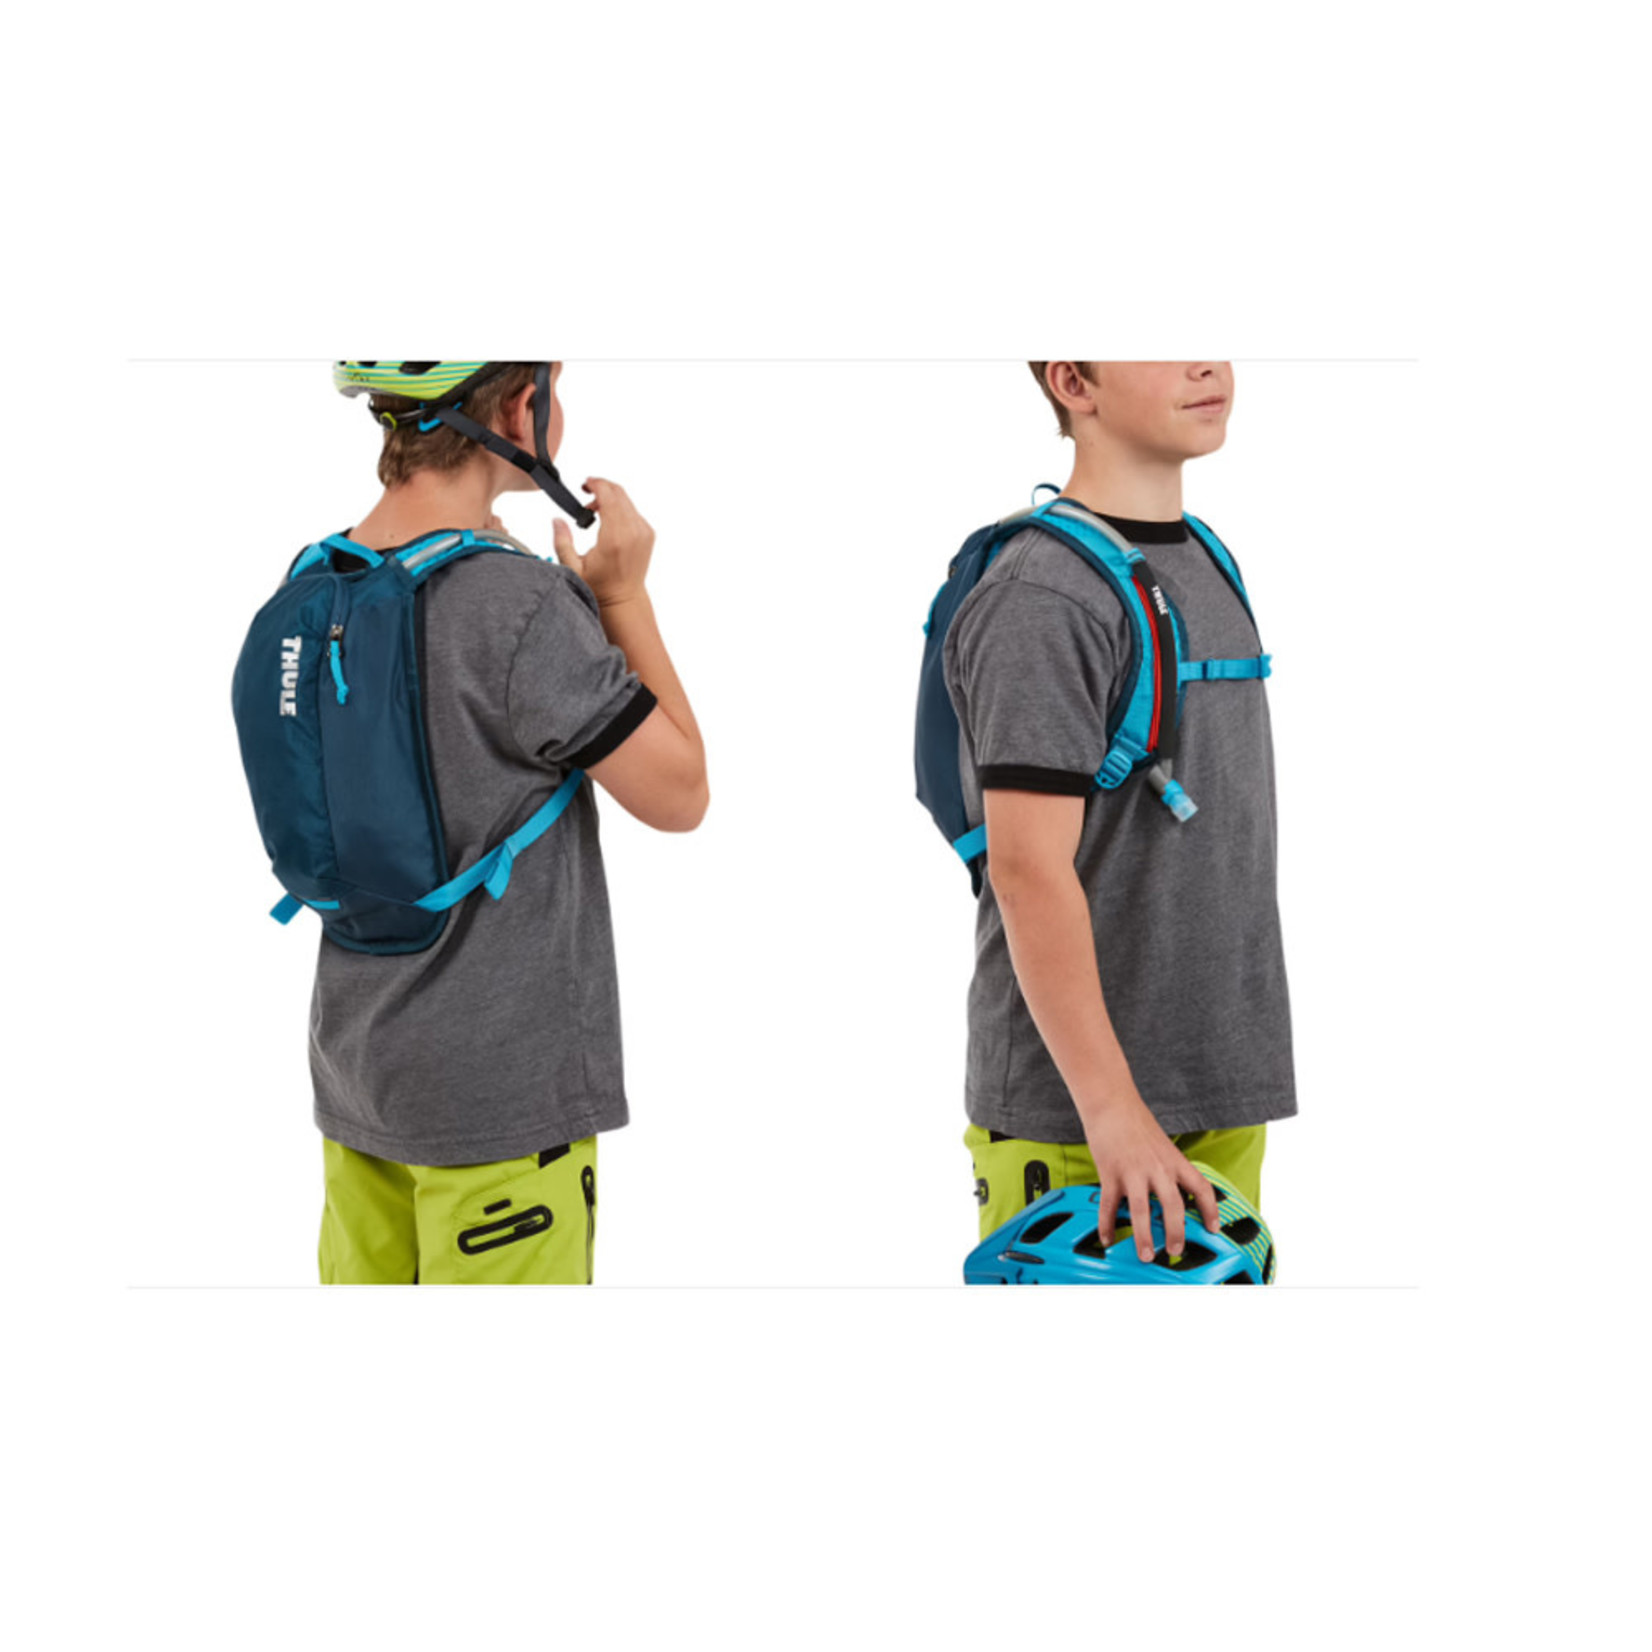 Thule Thule UpTake Youth 6L Hydration Backpack 3203811 - Blue- 18 x 13 x 32 cm